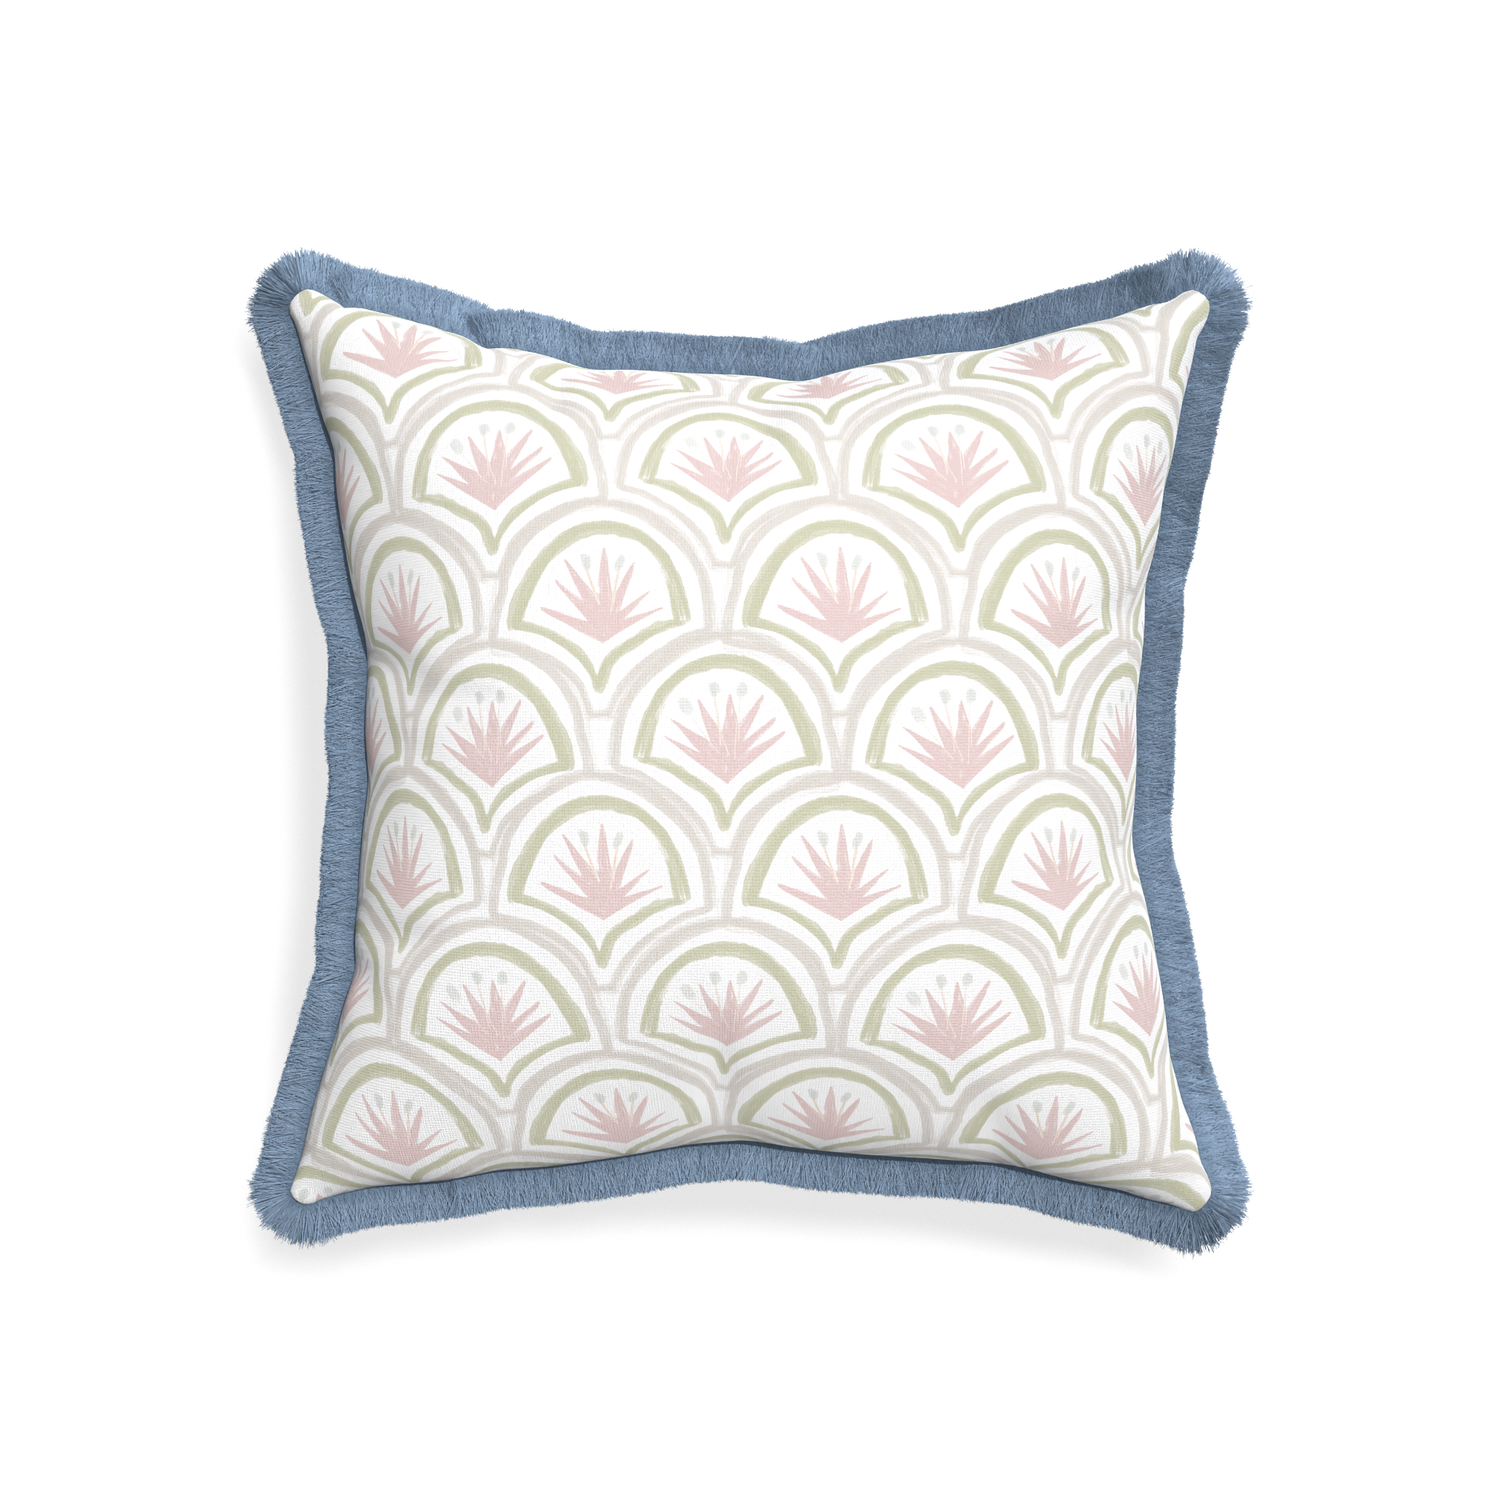 20-square thatcher rose custom pillow with sky fringe on white background